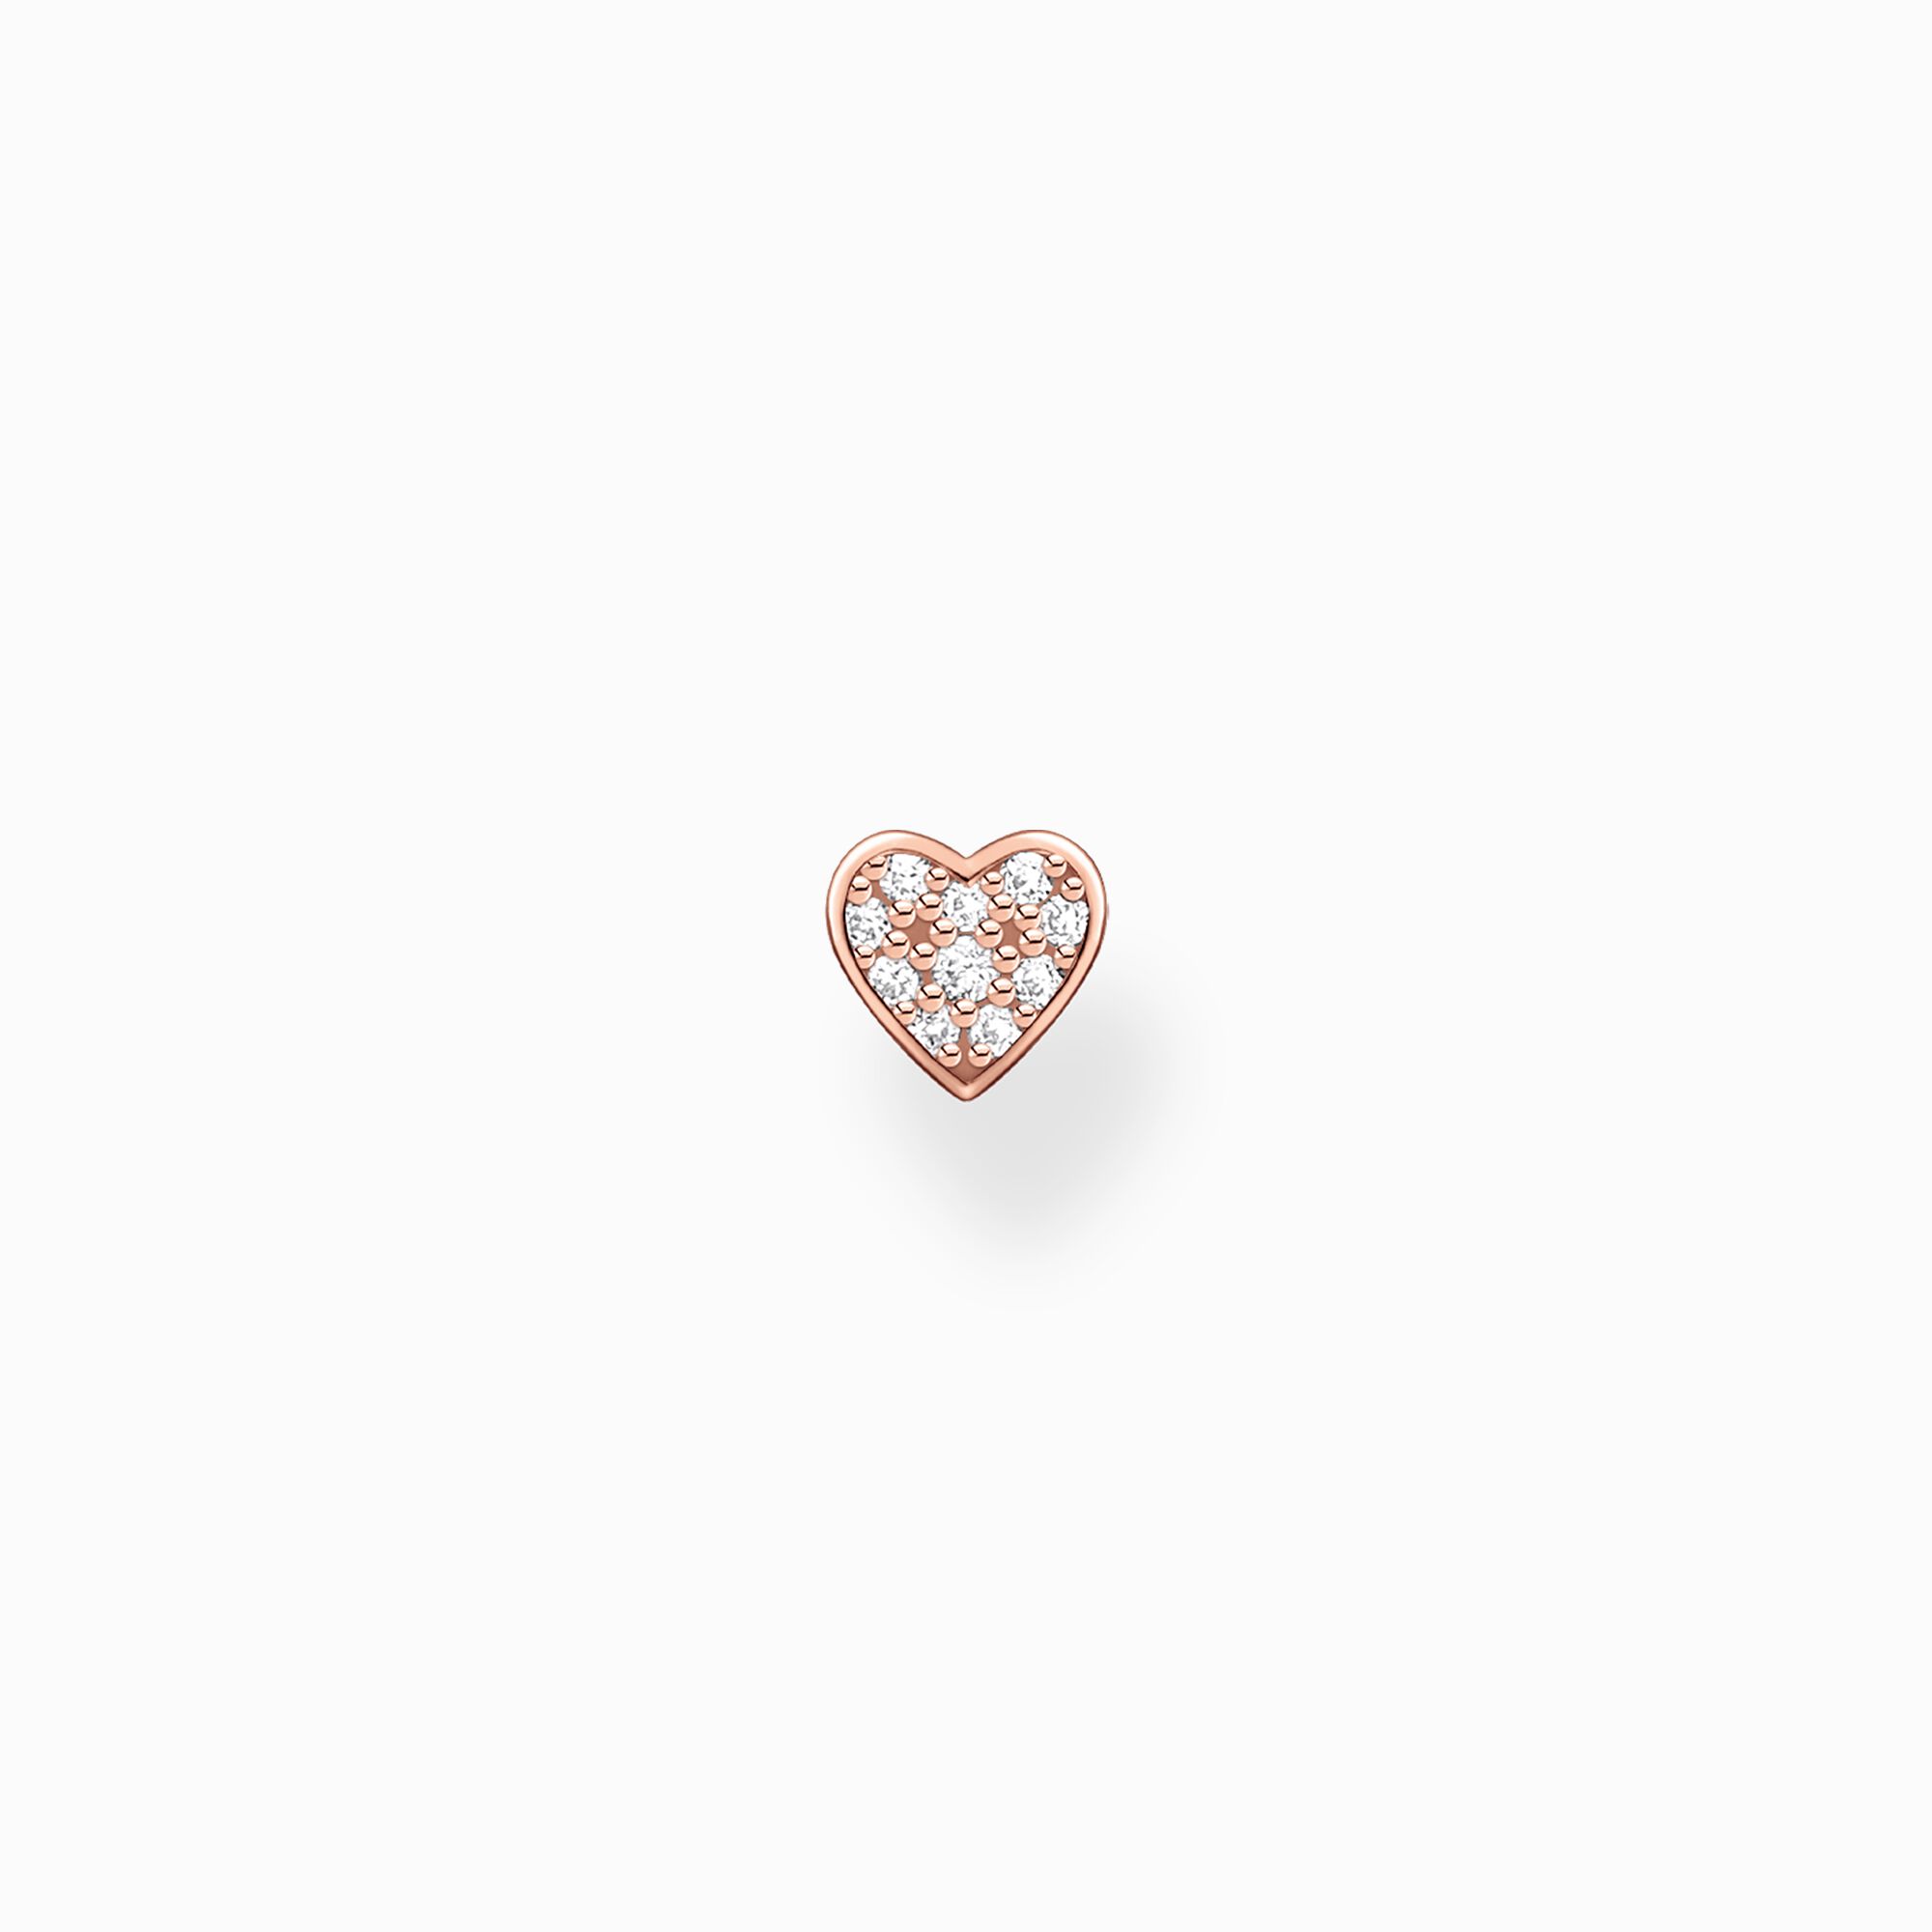 Ear stud ❤-shaped in rosé: Show your love with THOMAS SABO